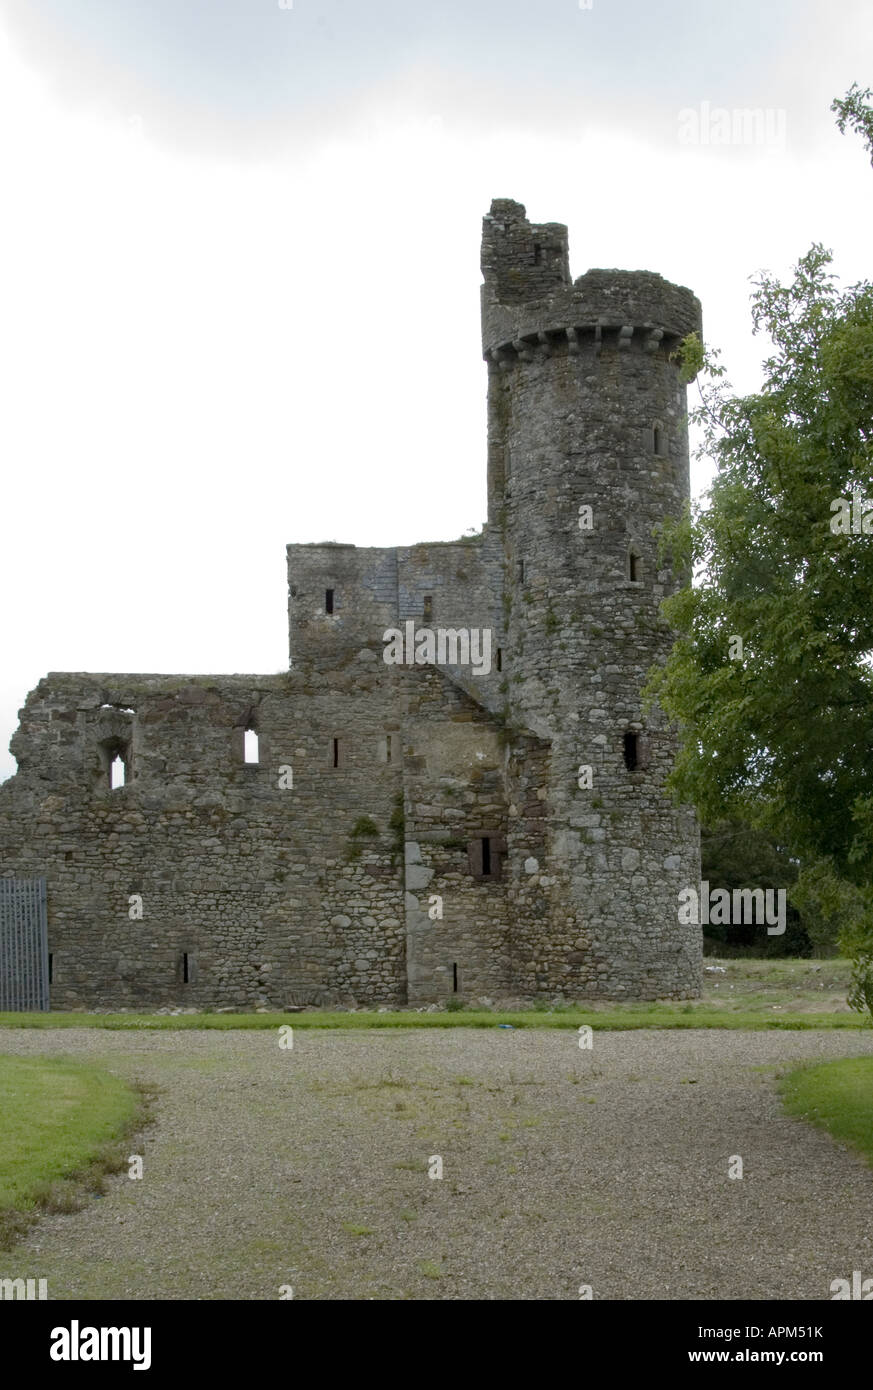 Château d'Featherd osheaphotography Co Wexford Irlande www com Banque D'Images